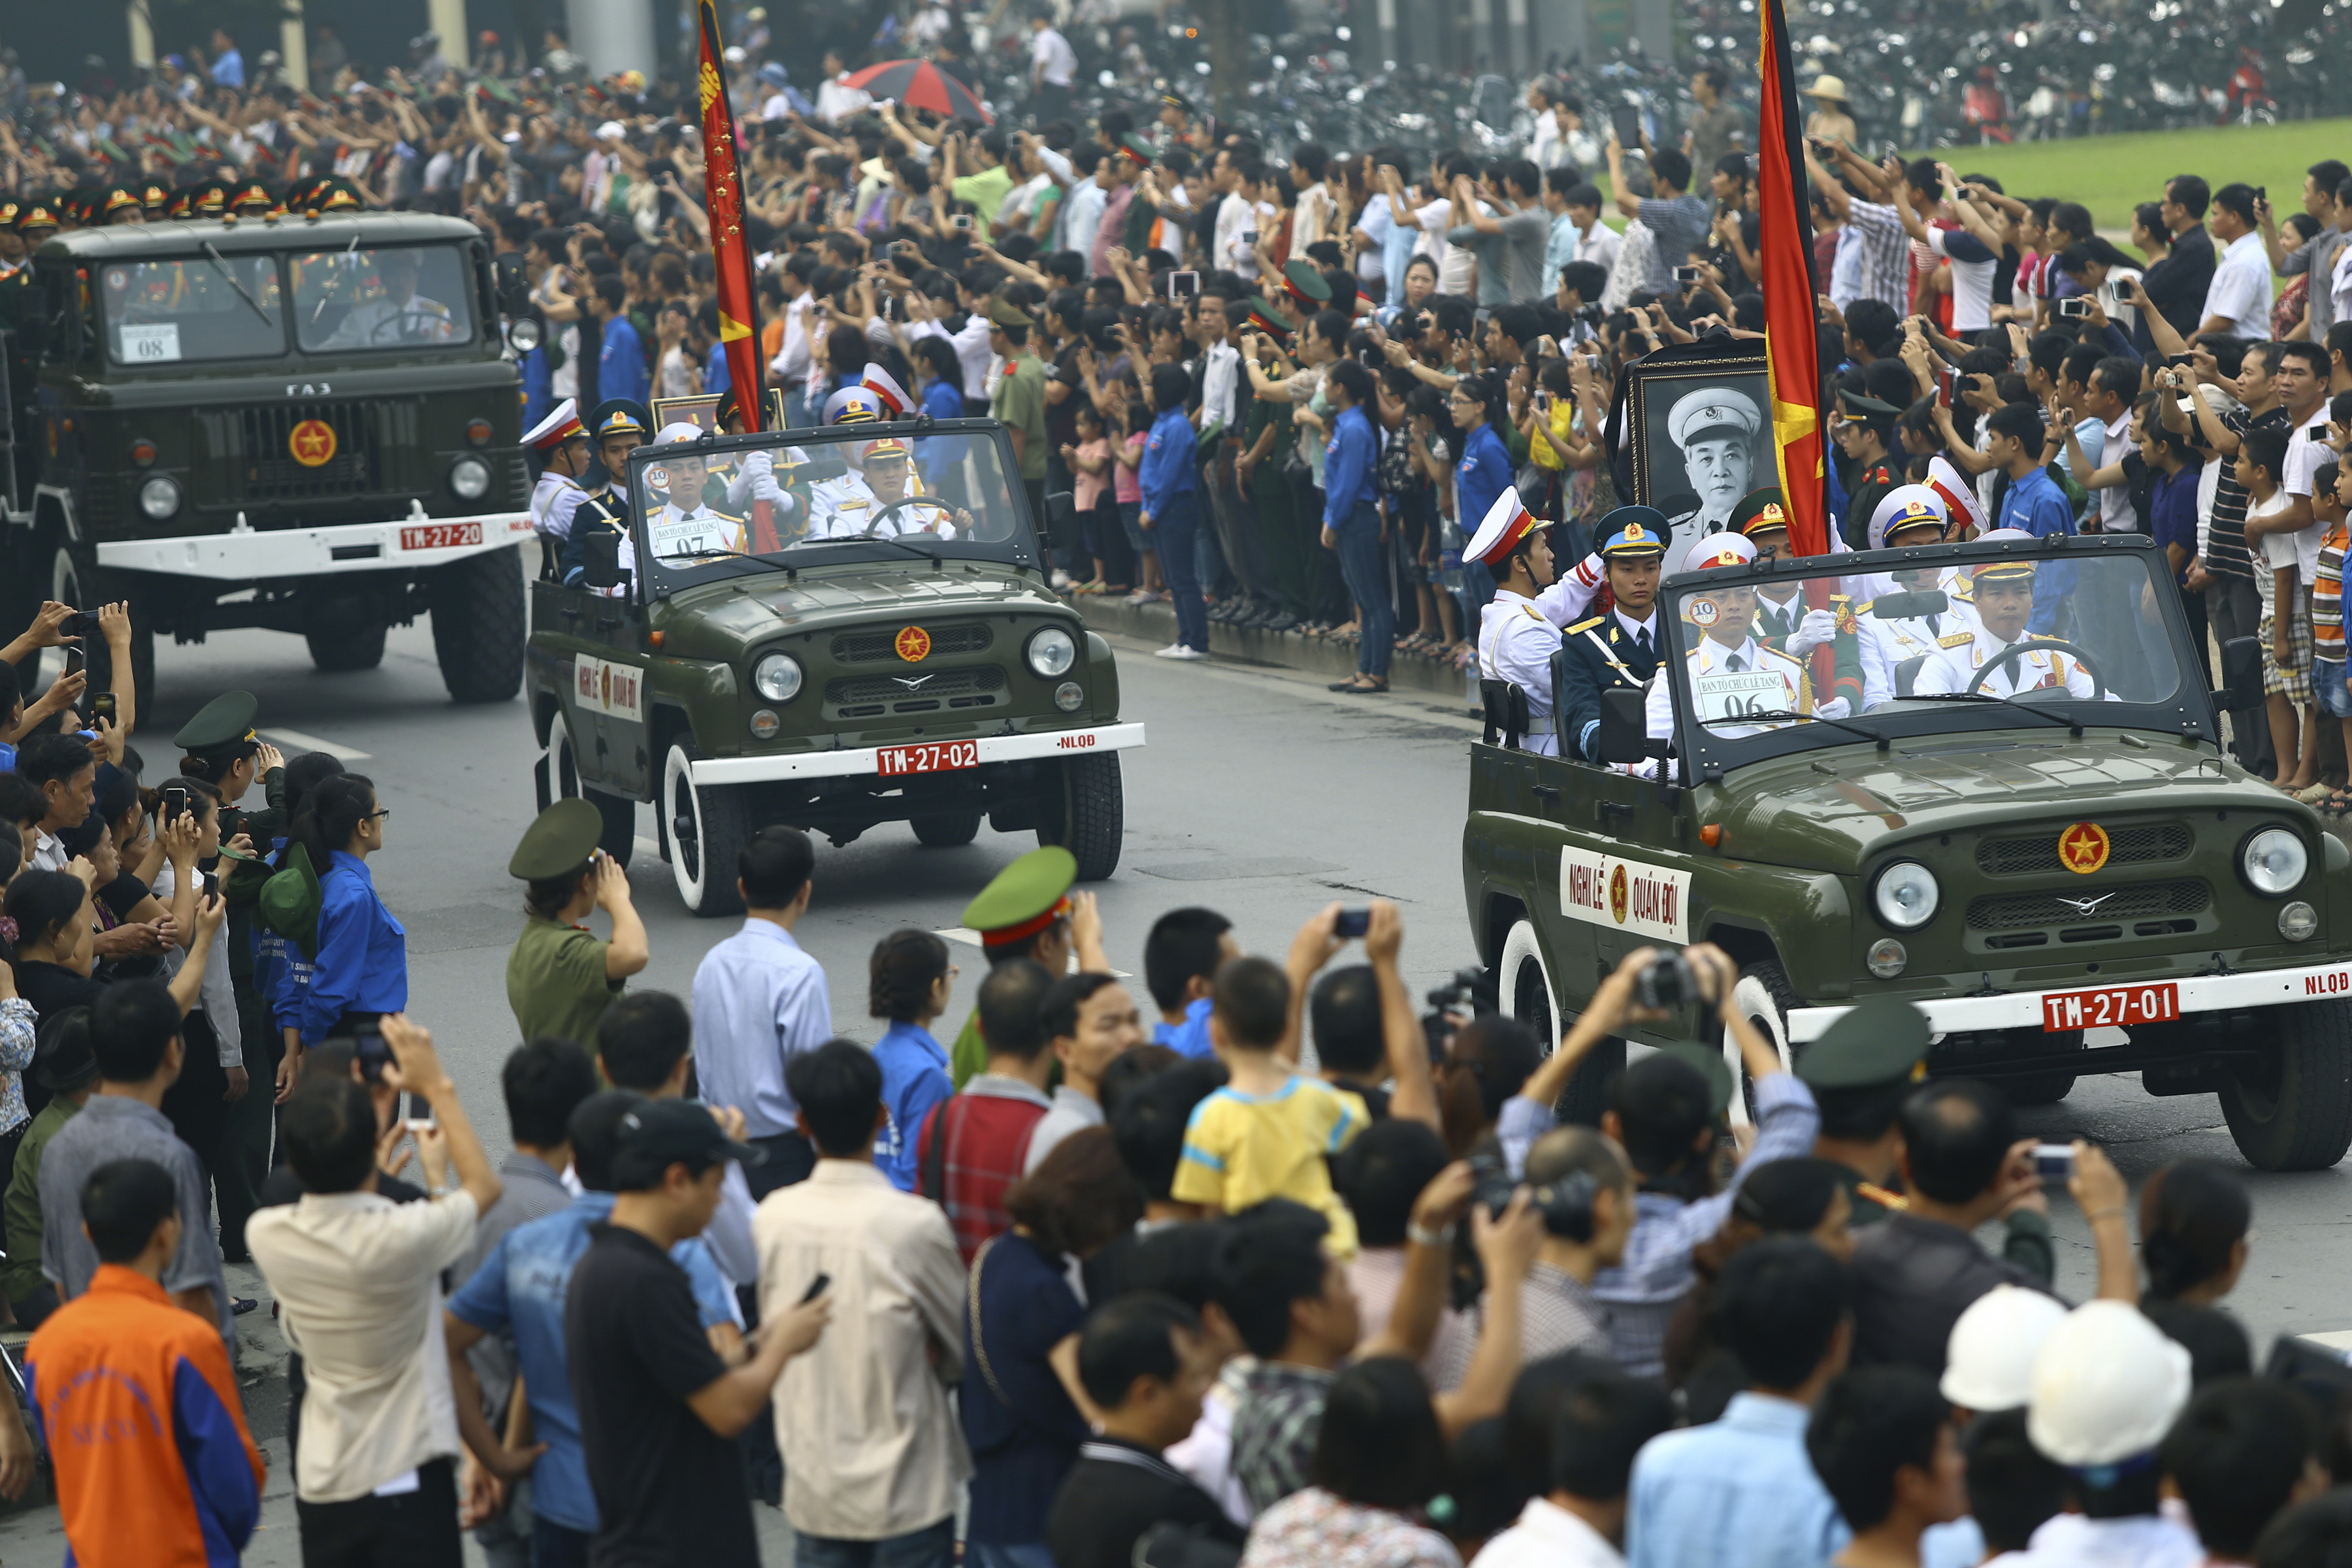 The convoy carrying the coffin of Vietnam's late General Vo Nguyen Giap passes by mourners gathered in front of the Ho Chi Minh Mausoleum in Hanoi. Photo: AP